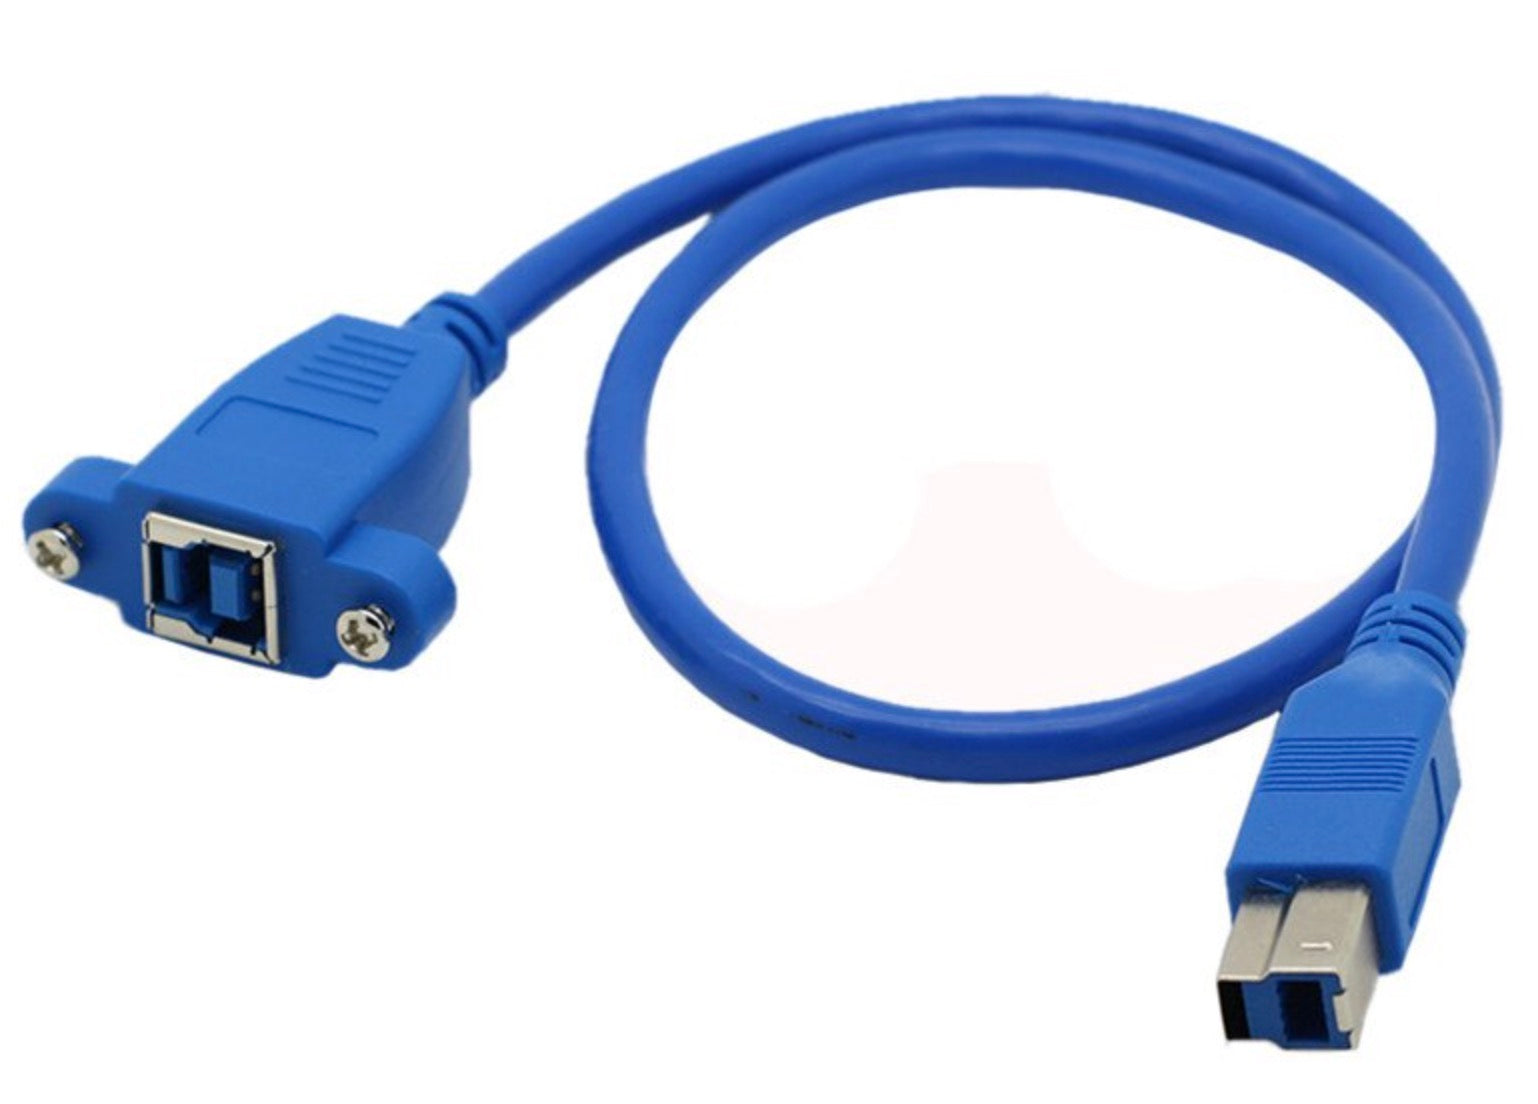 USB 3.0 Type B Male to Female Printer Extension Cable with Panel Mount 50cm